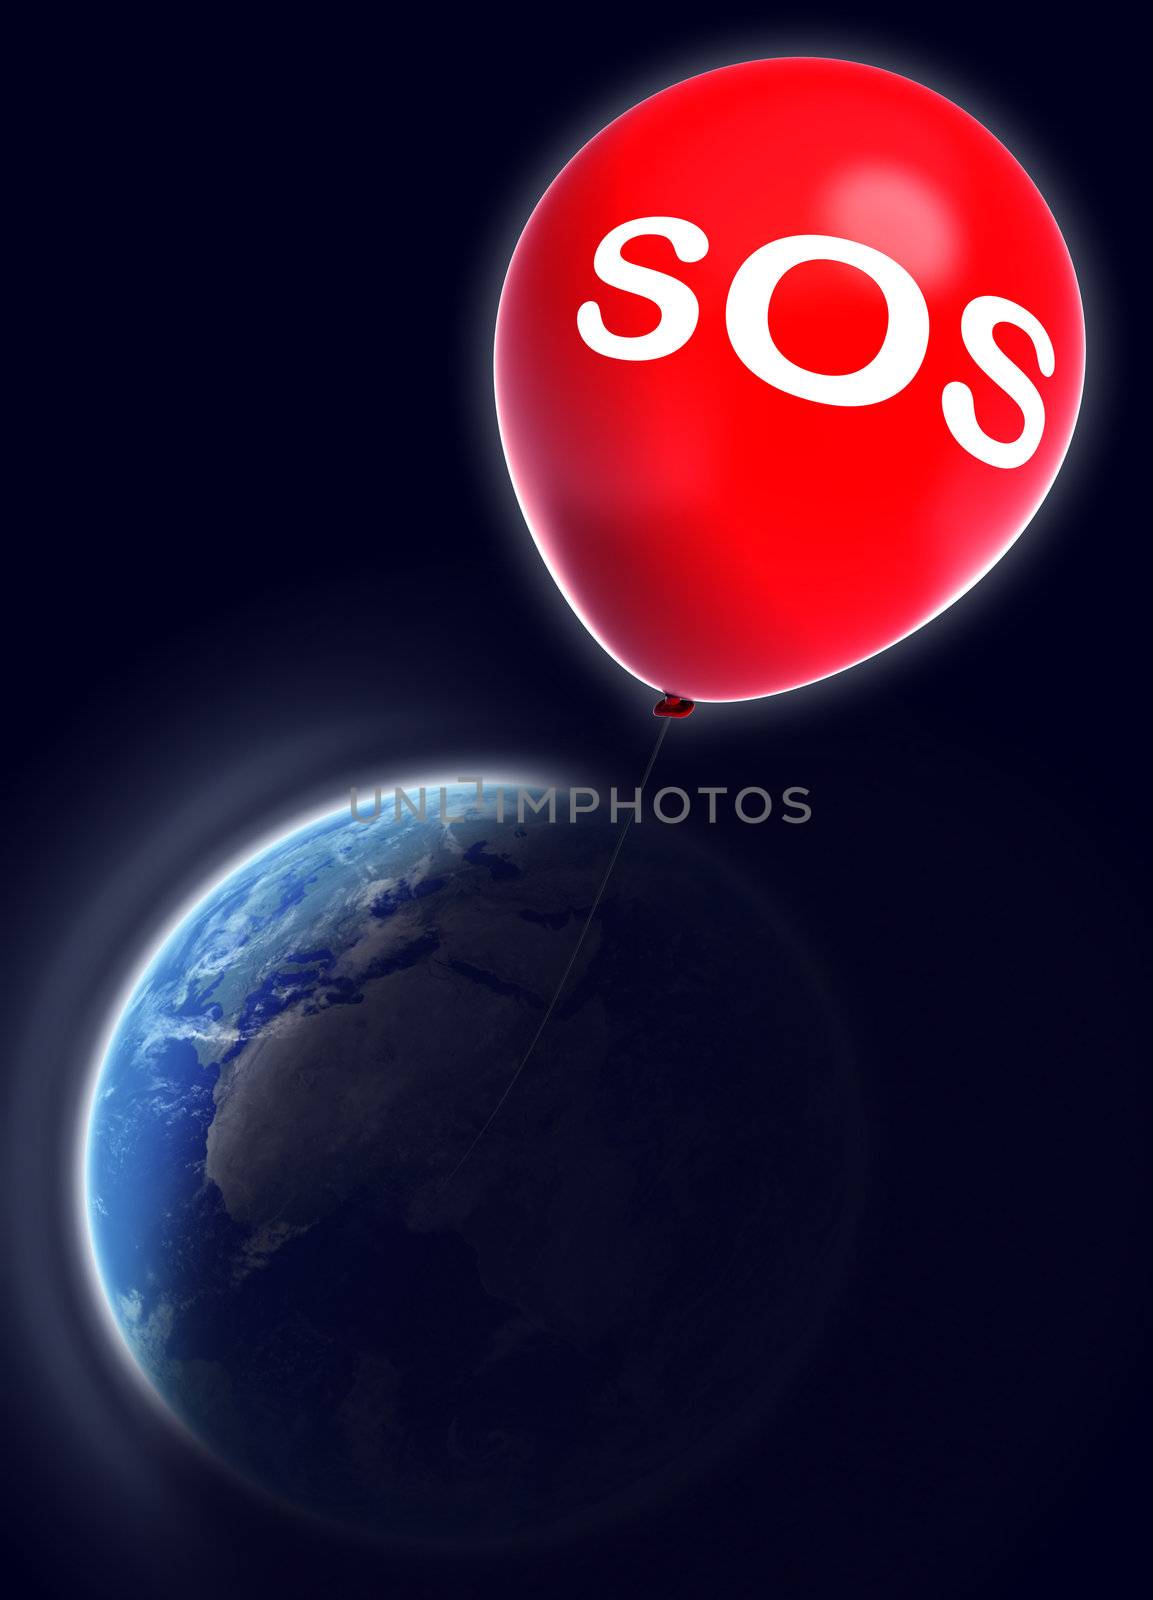 save earth sign on red balloon in space. Elements of this image furnished by NASA